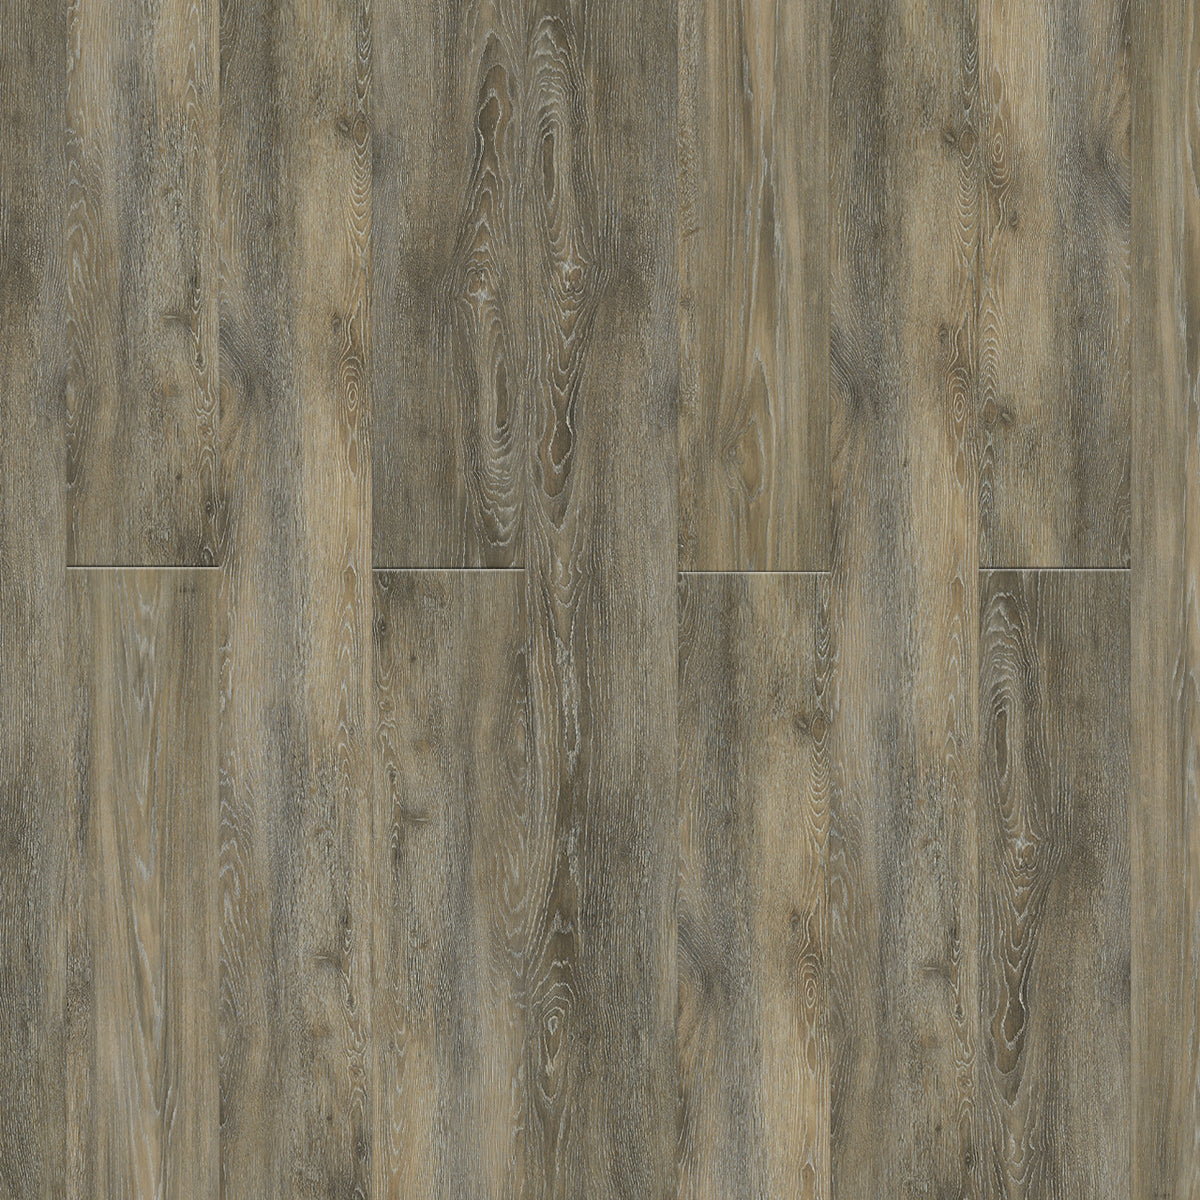 Engineered Floors - Triumph Collection - Bella Sera - 9 in. x 72 in. - Tuscany